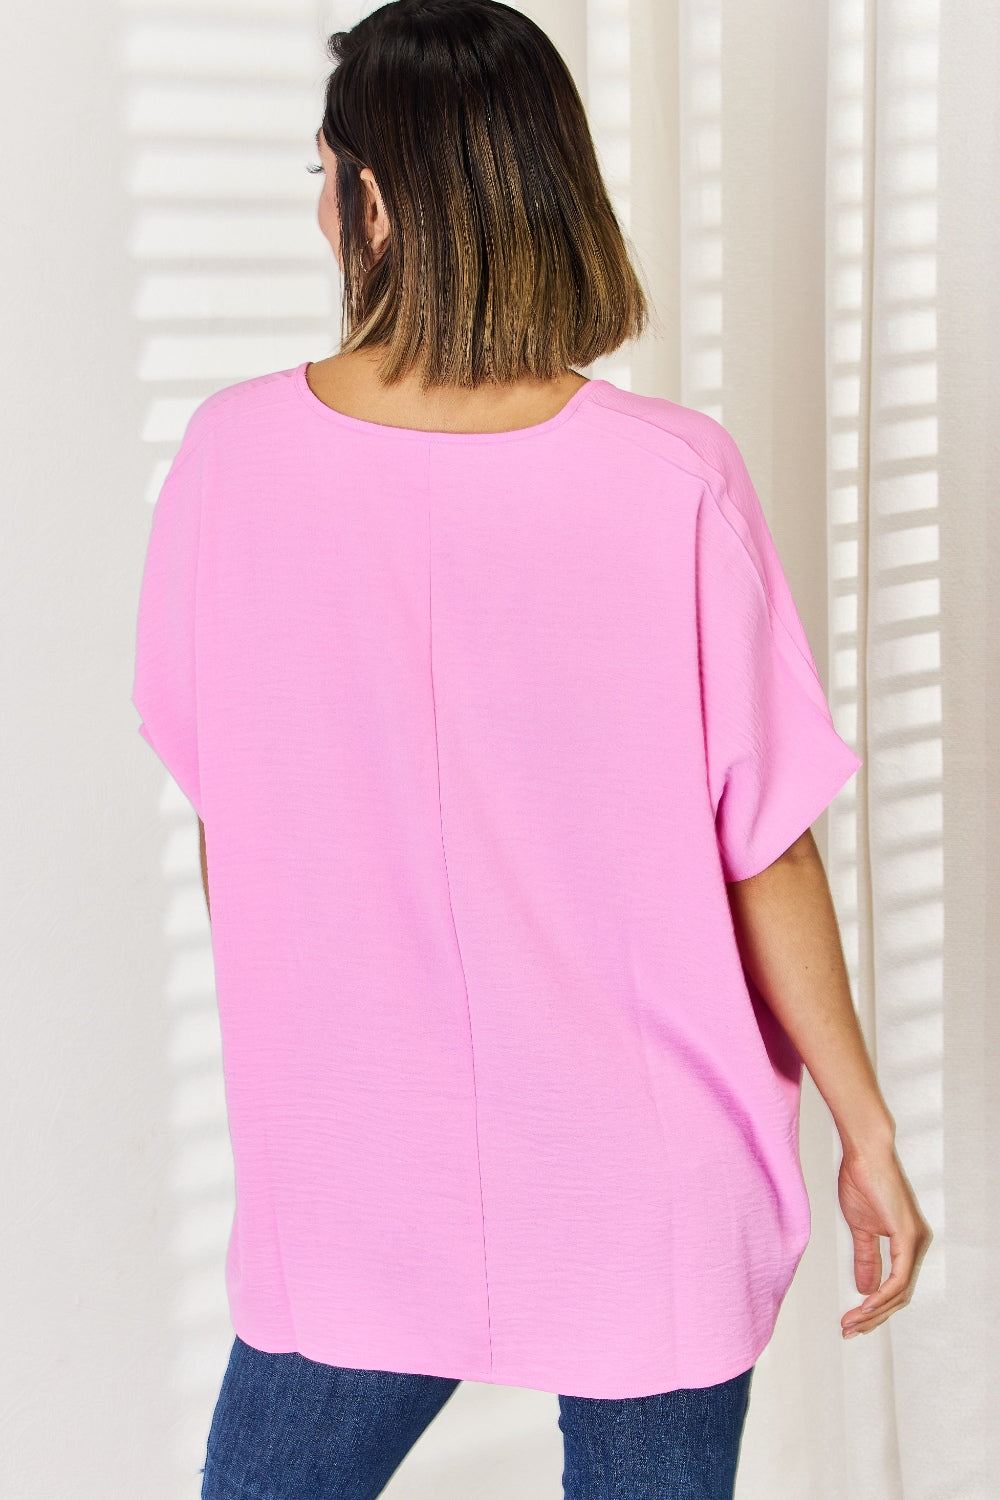 Zenana Woven Airflow Top - Short Sleeve - Pink - Inspired Eye Boutique